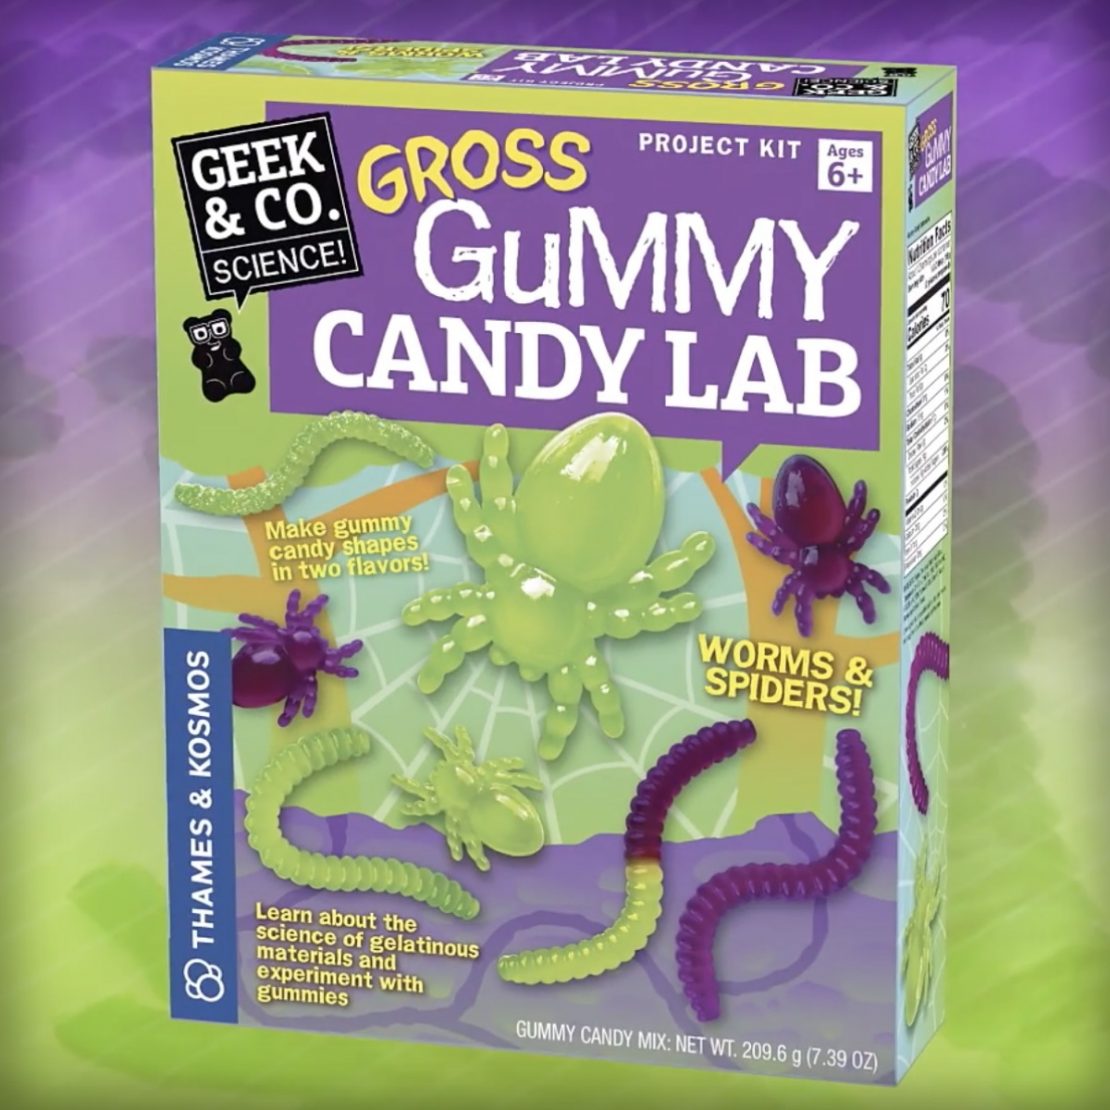 Gross Gummy Candy Lab from Geek & Co